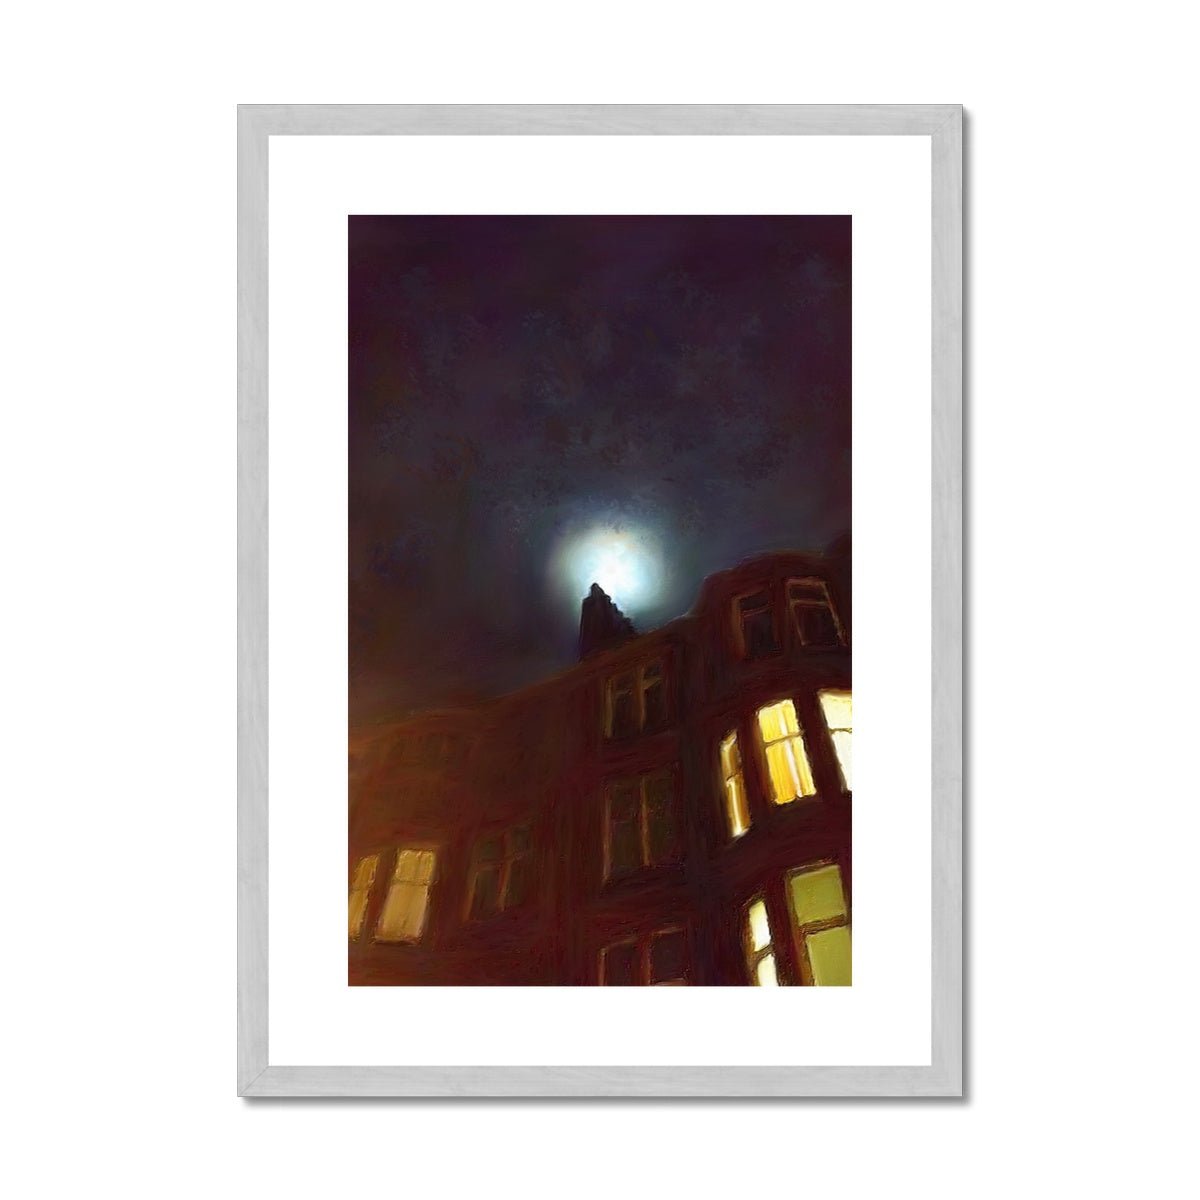 A Moonlit Tenement Painting | Antique Framed & Mounted Prints From Scotland-Antique Framed & Mounted Prints-Edinburgh & Glasgow Art Gallery-A2 Portrait-Silver Frame-Paintings, Prints, Homeware, Art Gifts From Scotland By Scottish Artist Kevin Hunter